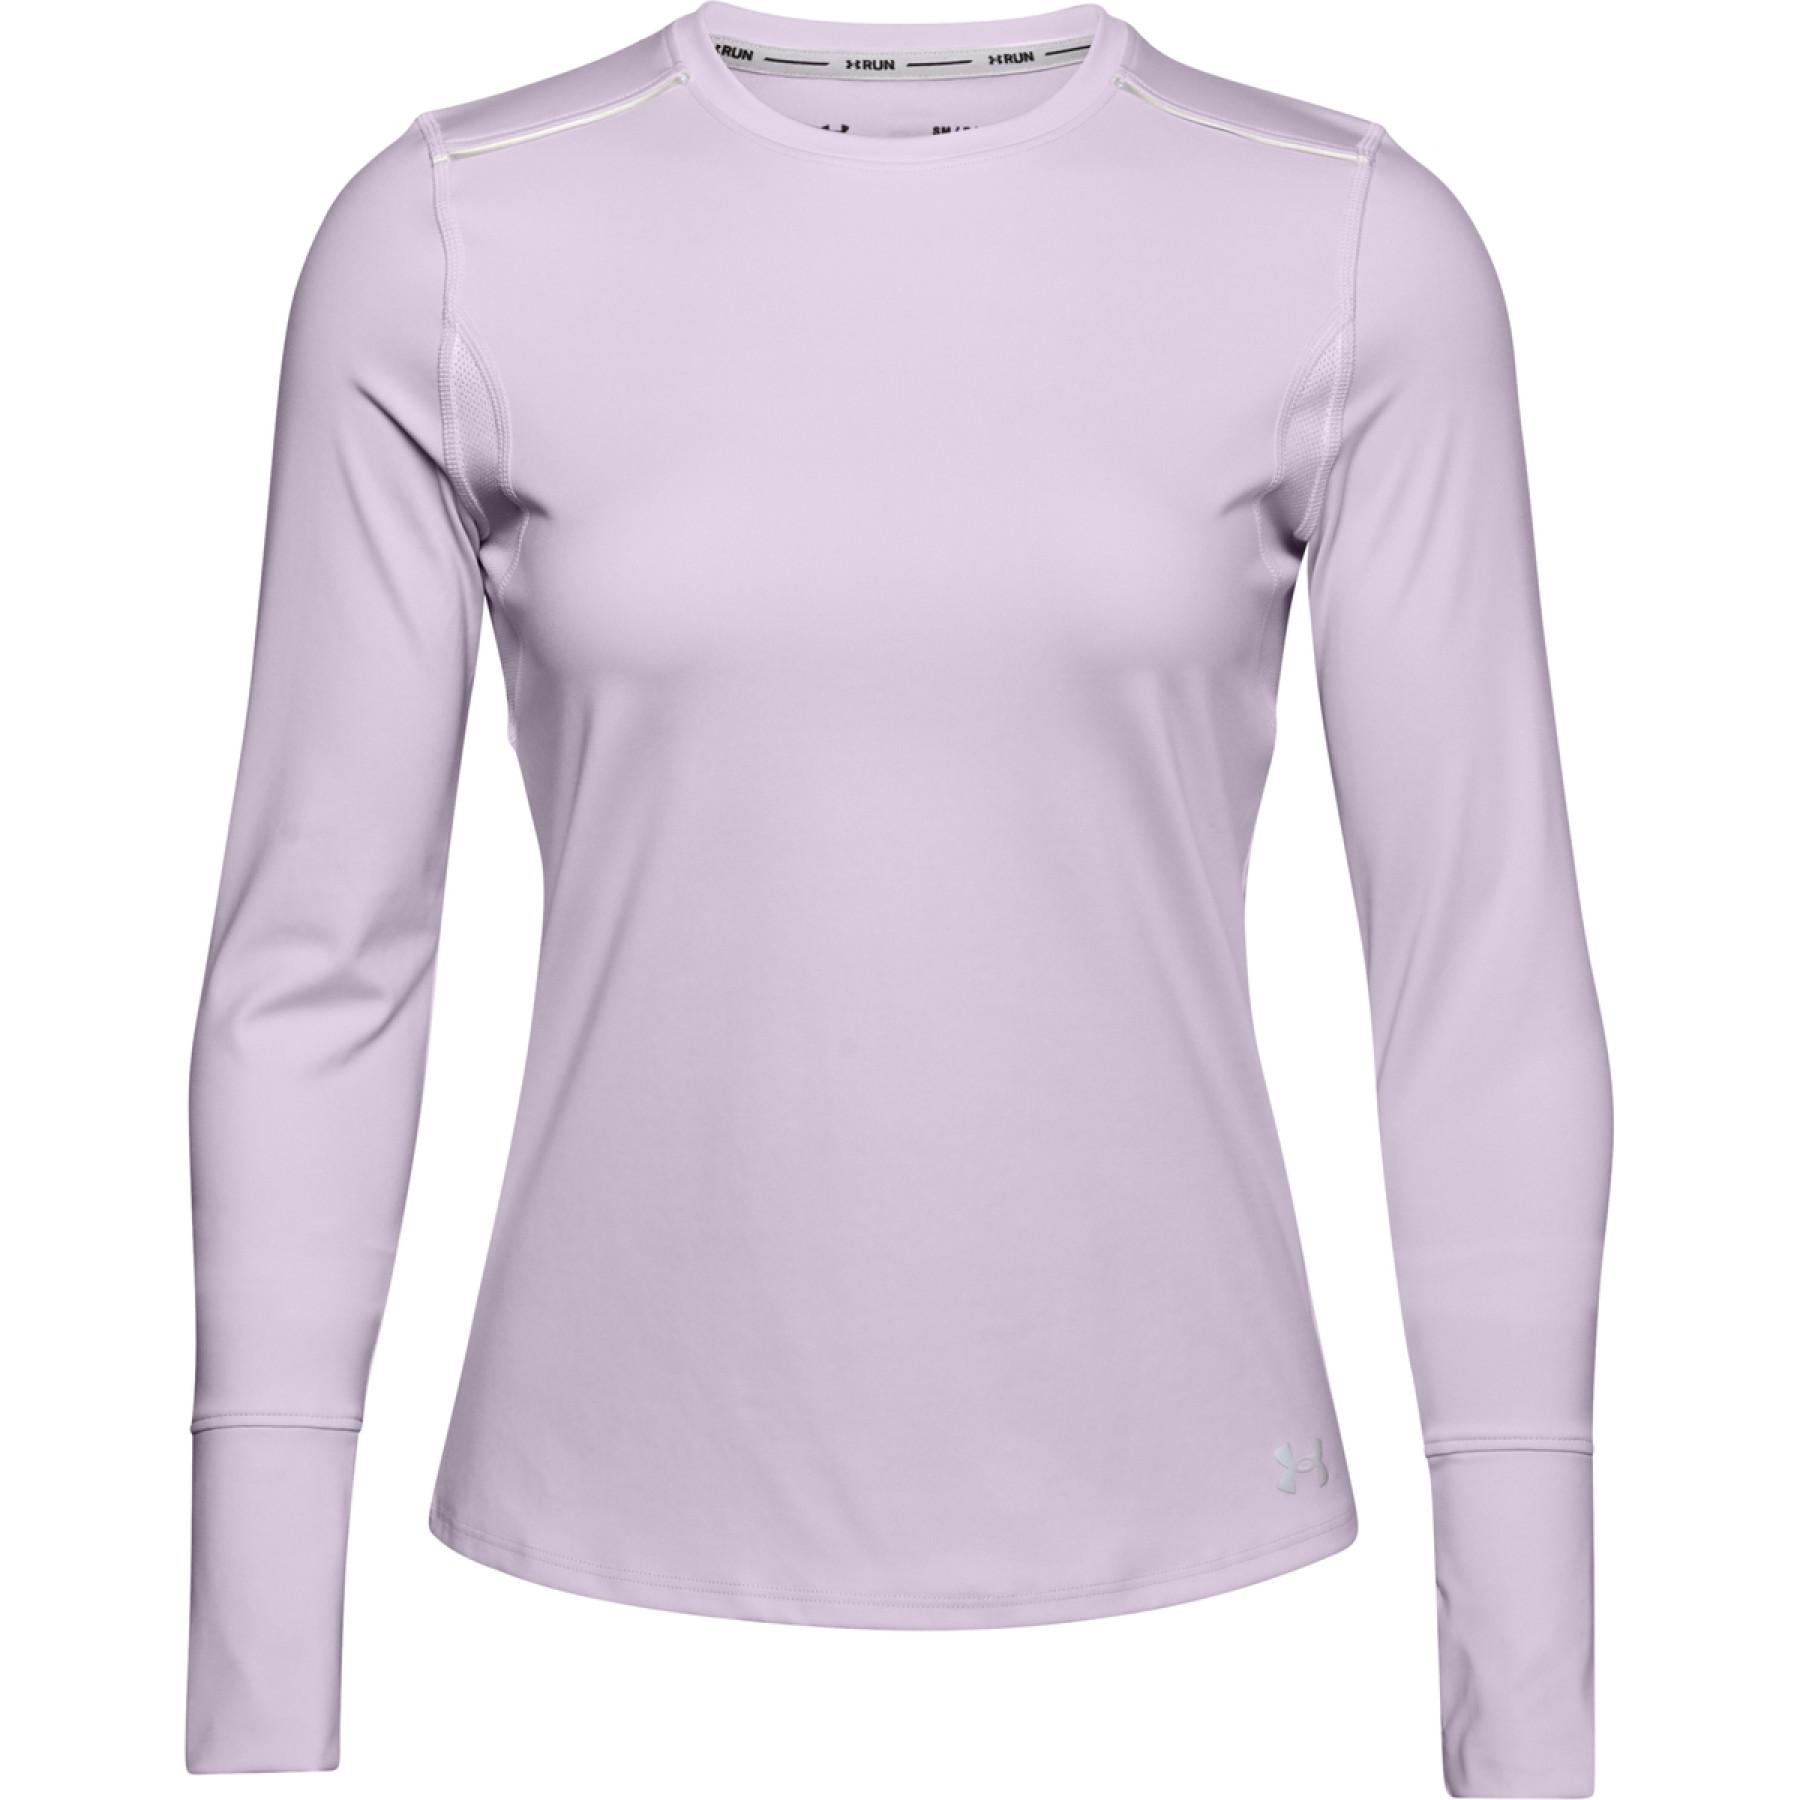 Women's jersey Under Armour à manches longues Empowered Crew